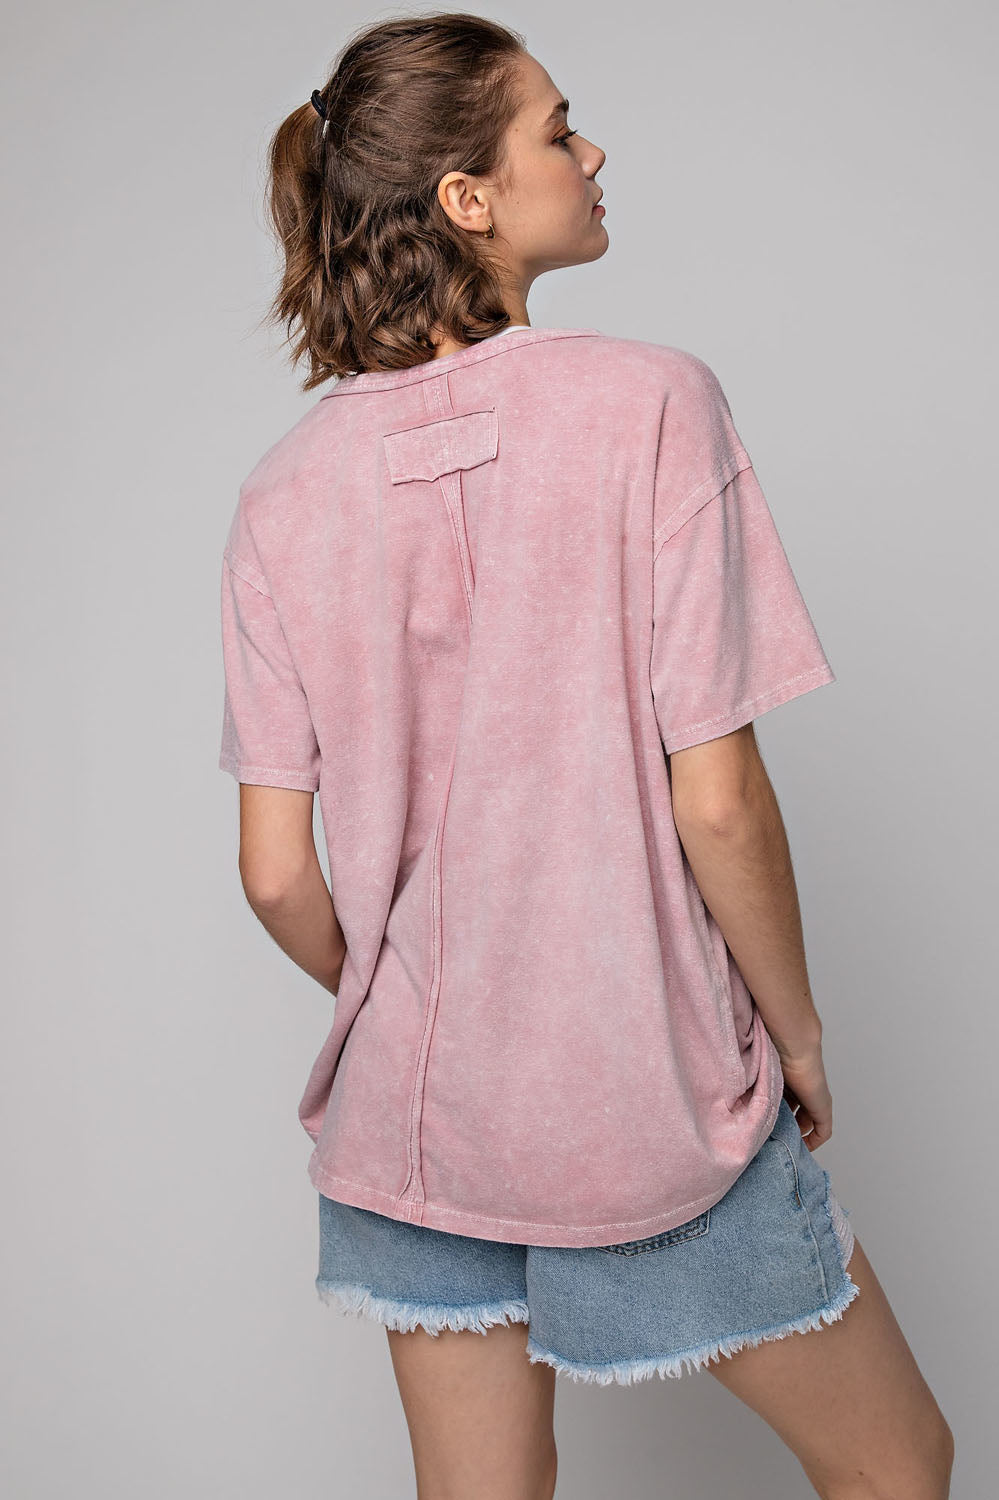 Mineral wash keyhole shirt by RaeMode